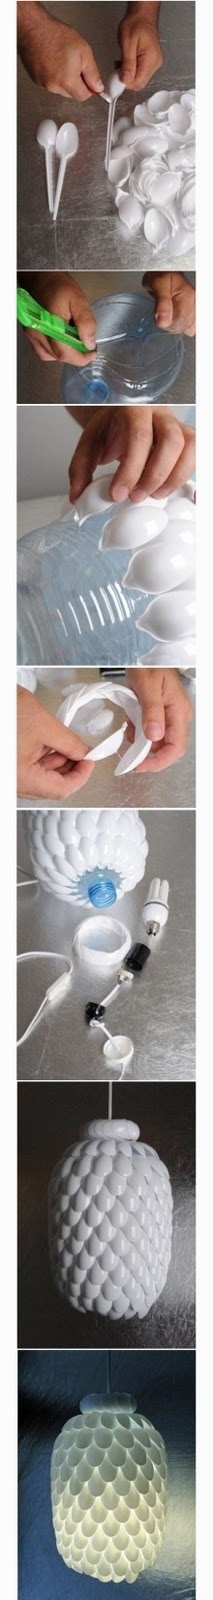 Plastic spoons and a water jug can become a light with great texture.